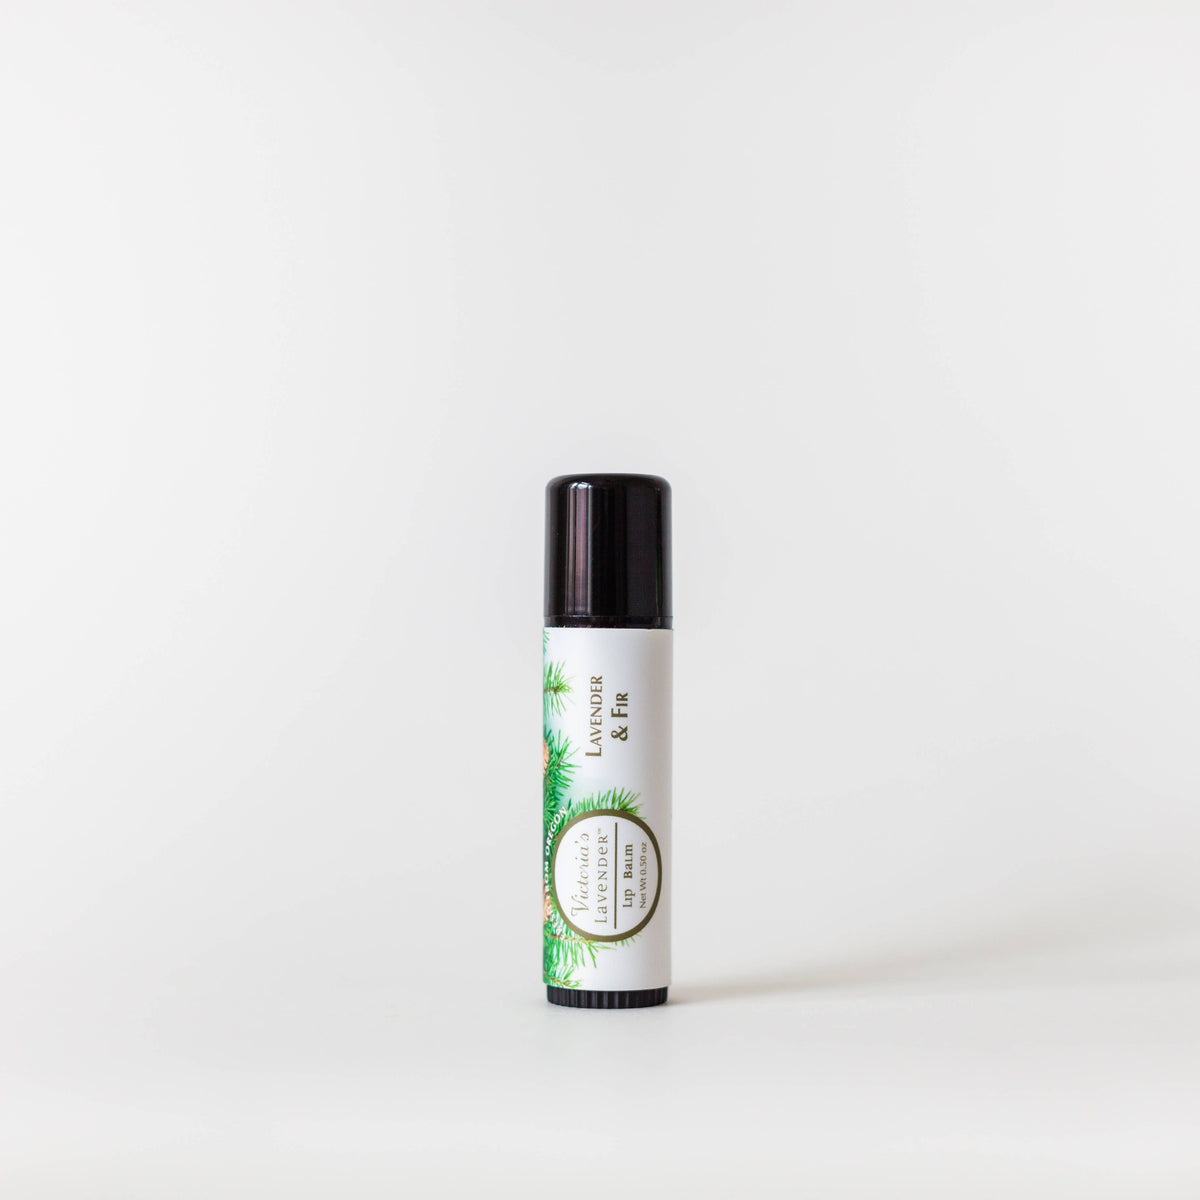 A cylindrical container of Victoria's Lavender - Lavender Fir Healing Lip Balm with a white label featuring green botanical illustrations, displayed against a plain white background.